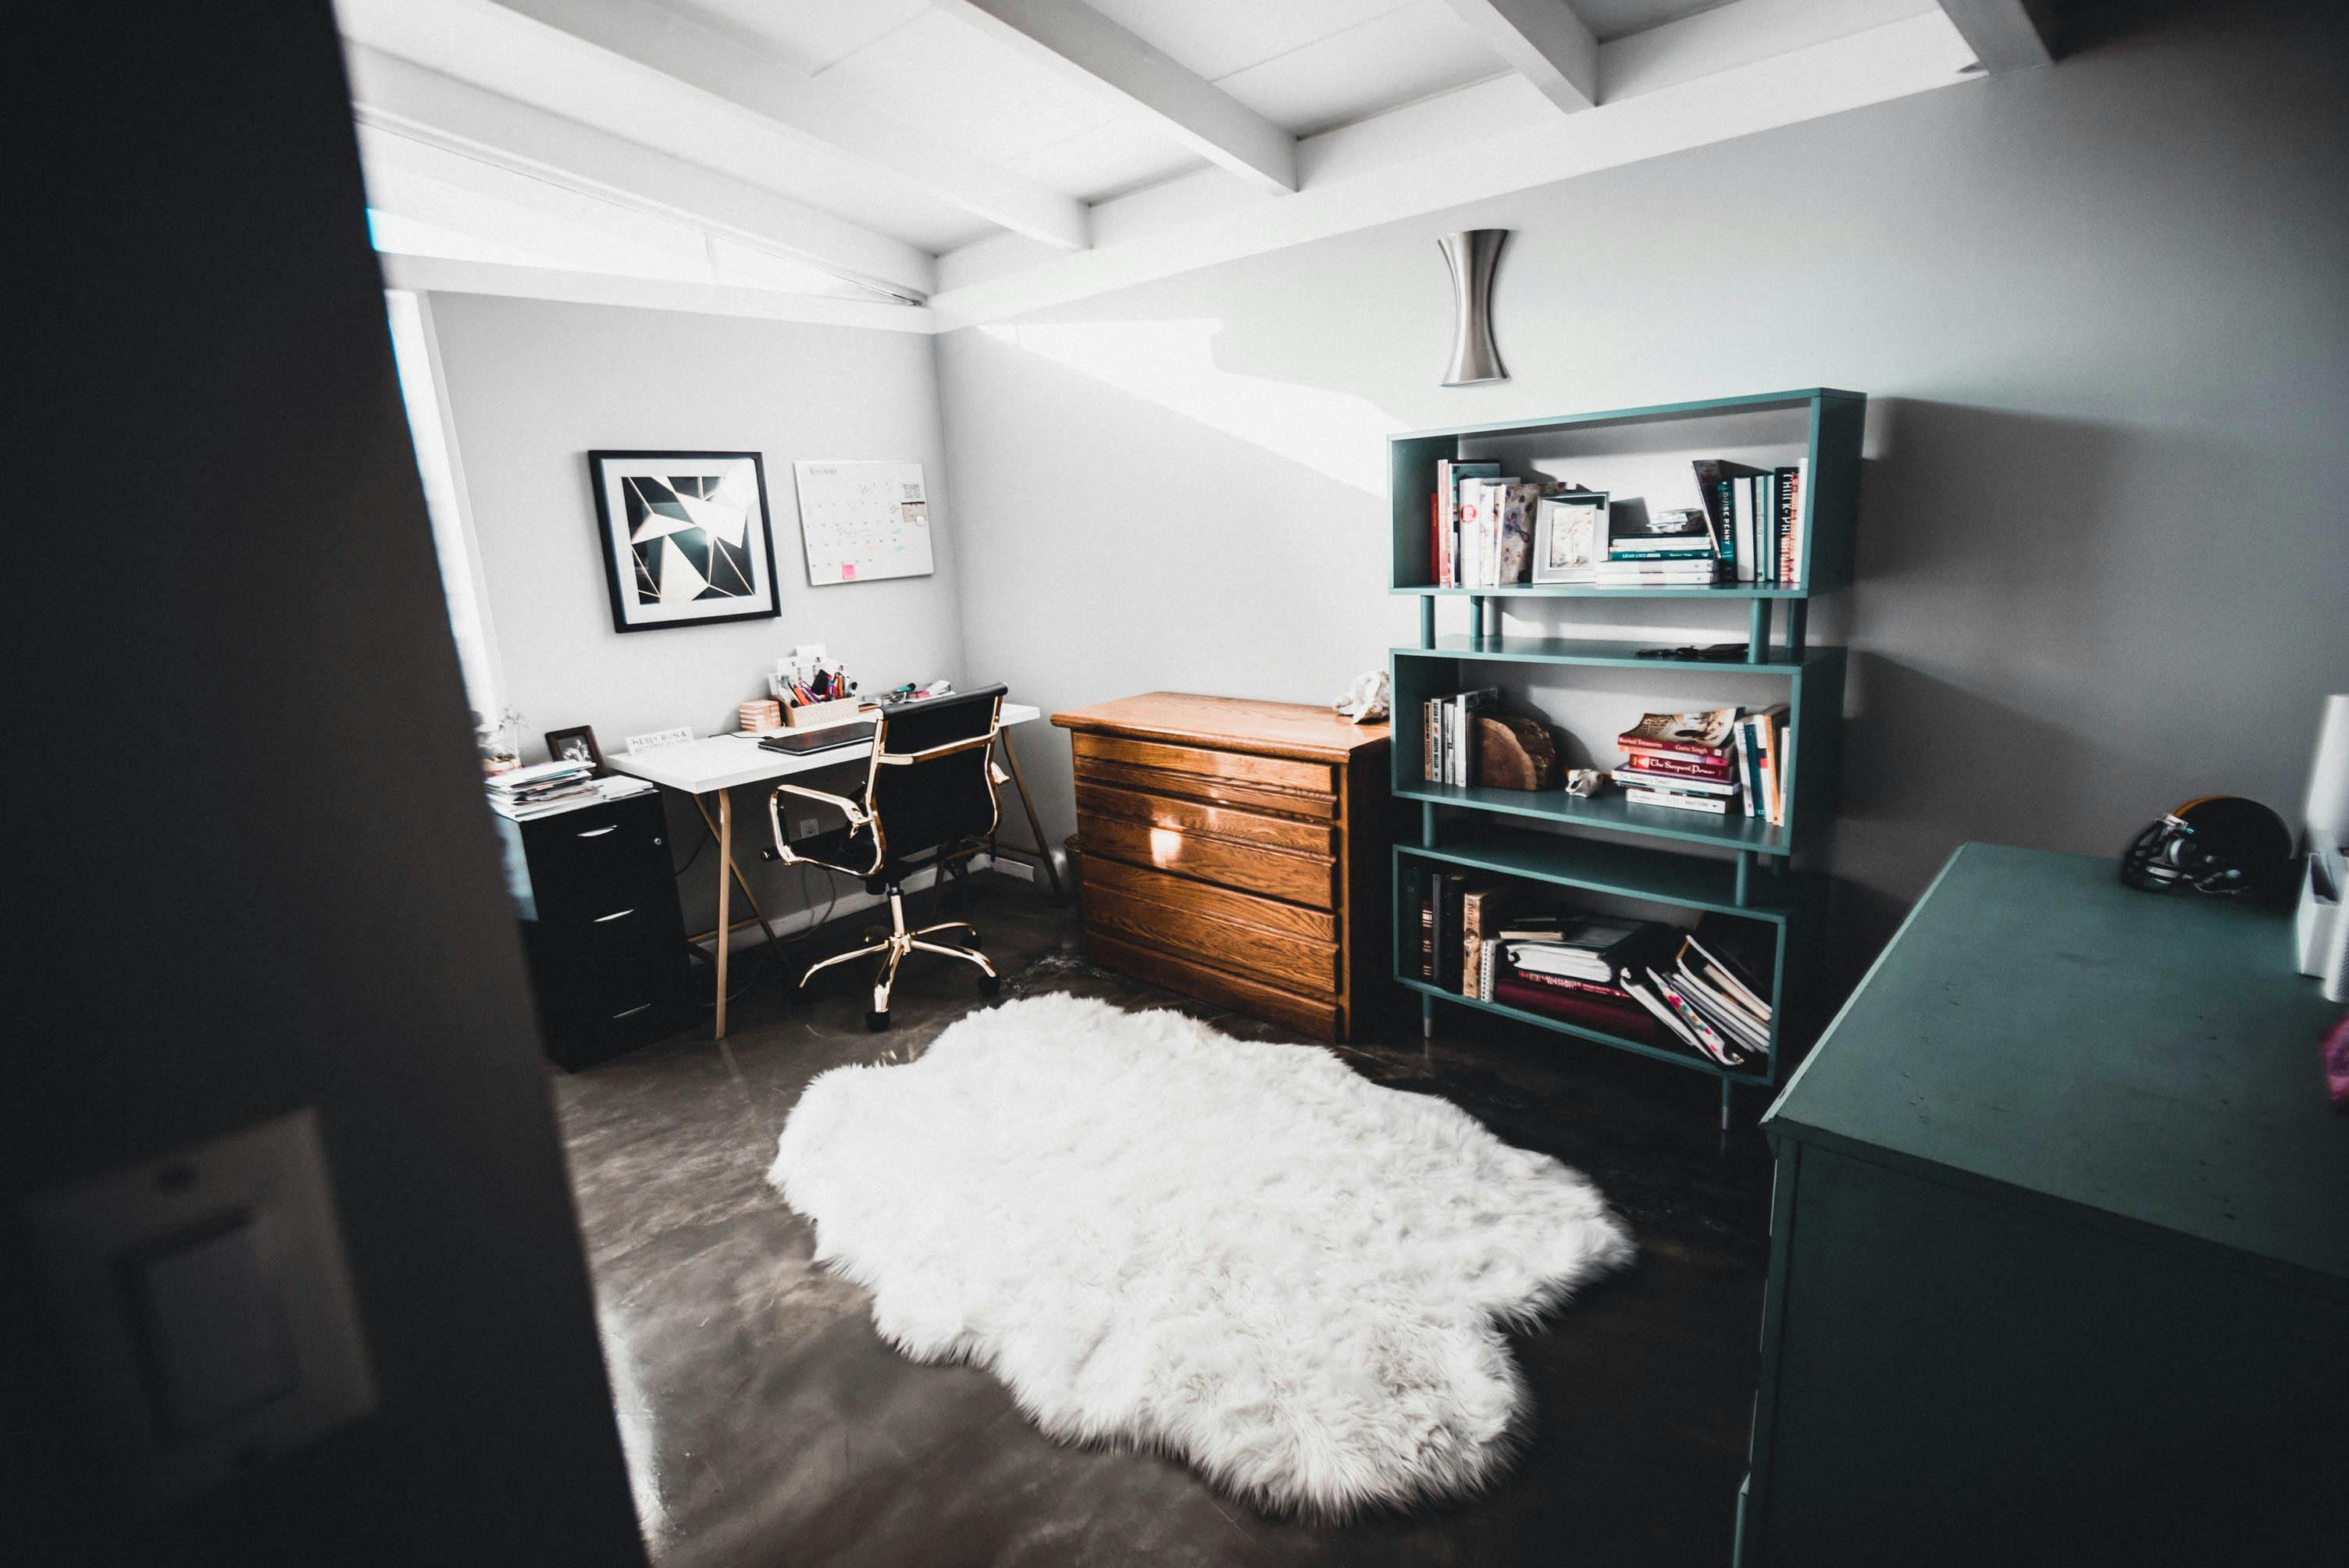 For illustration purposes only. A home office | Source: Pexels